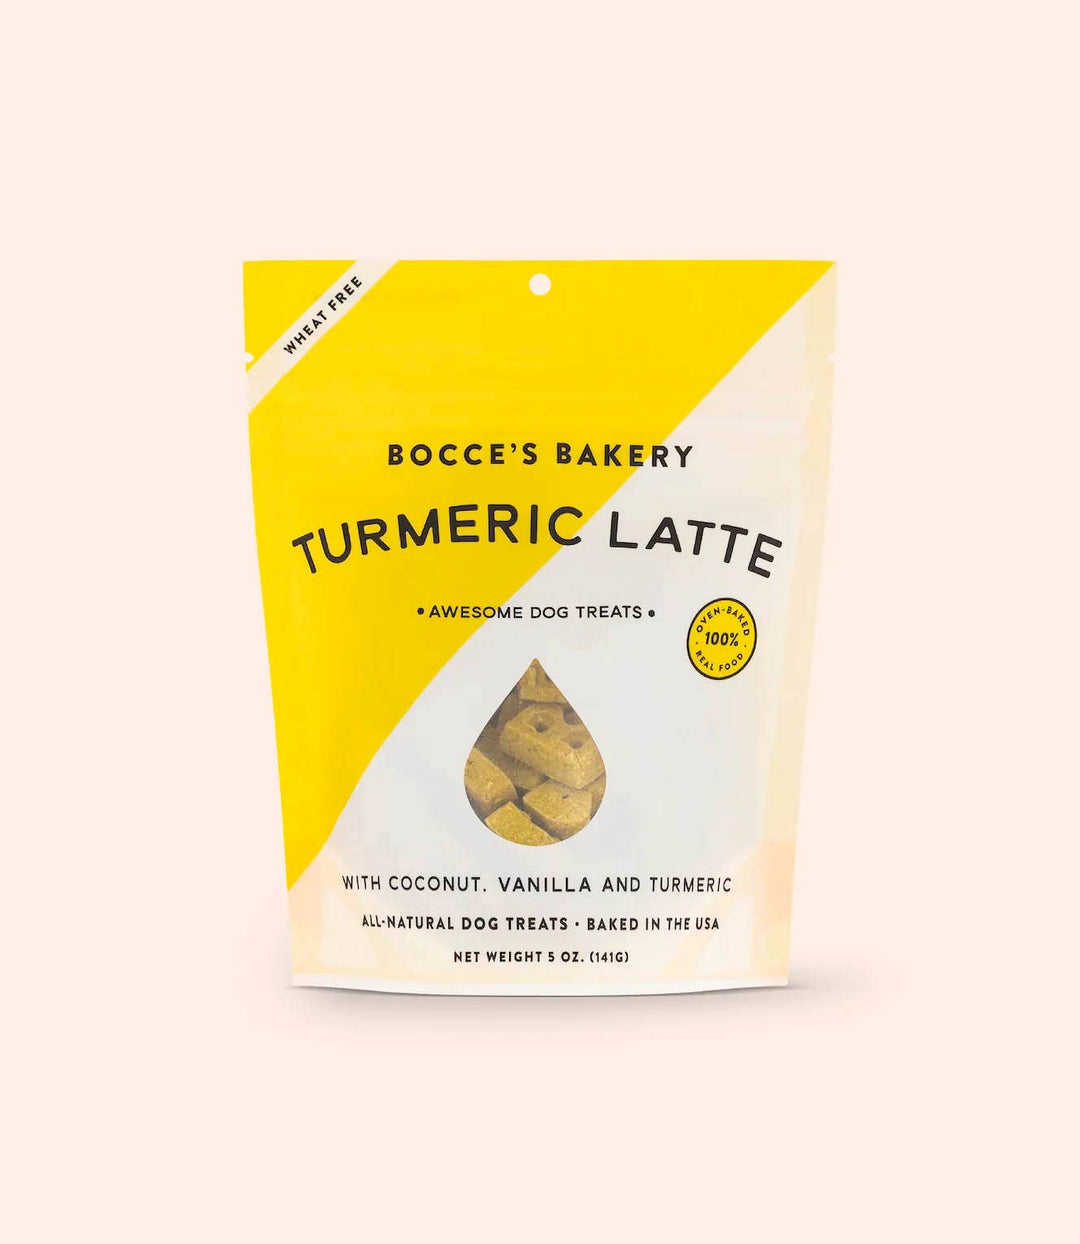 Bocce's Bakery Turmeric Latte 5oz Biscuits Dog Treats